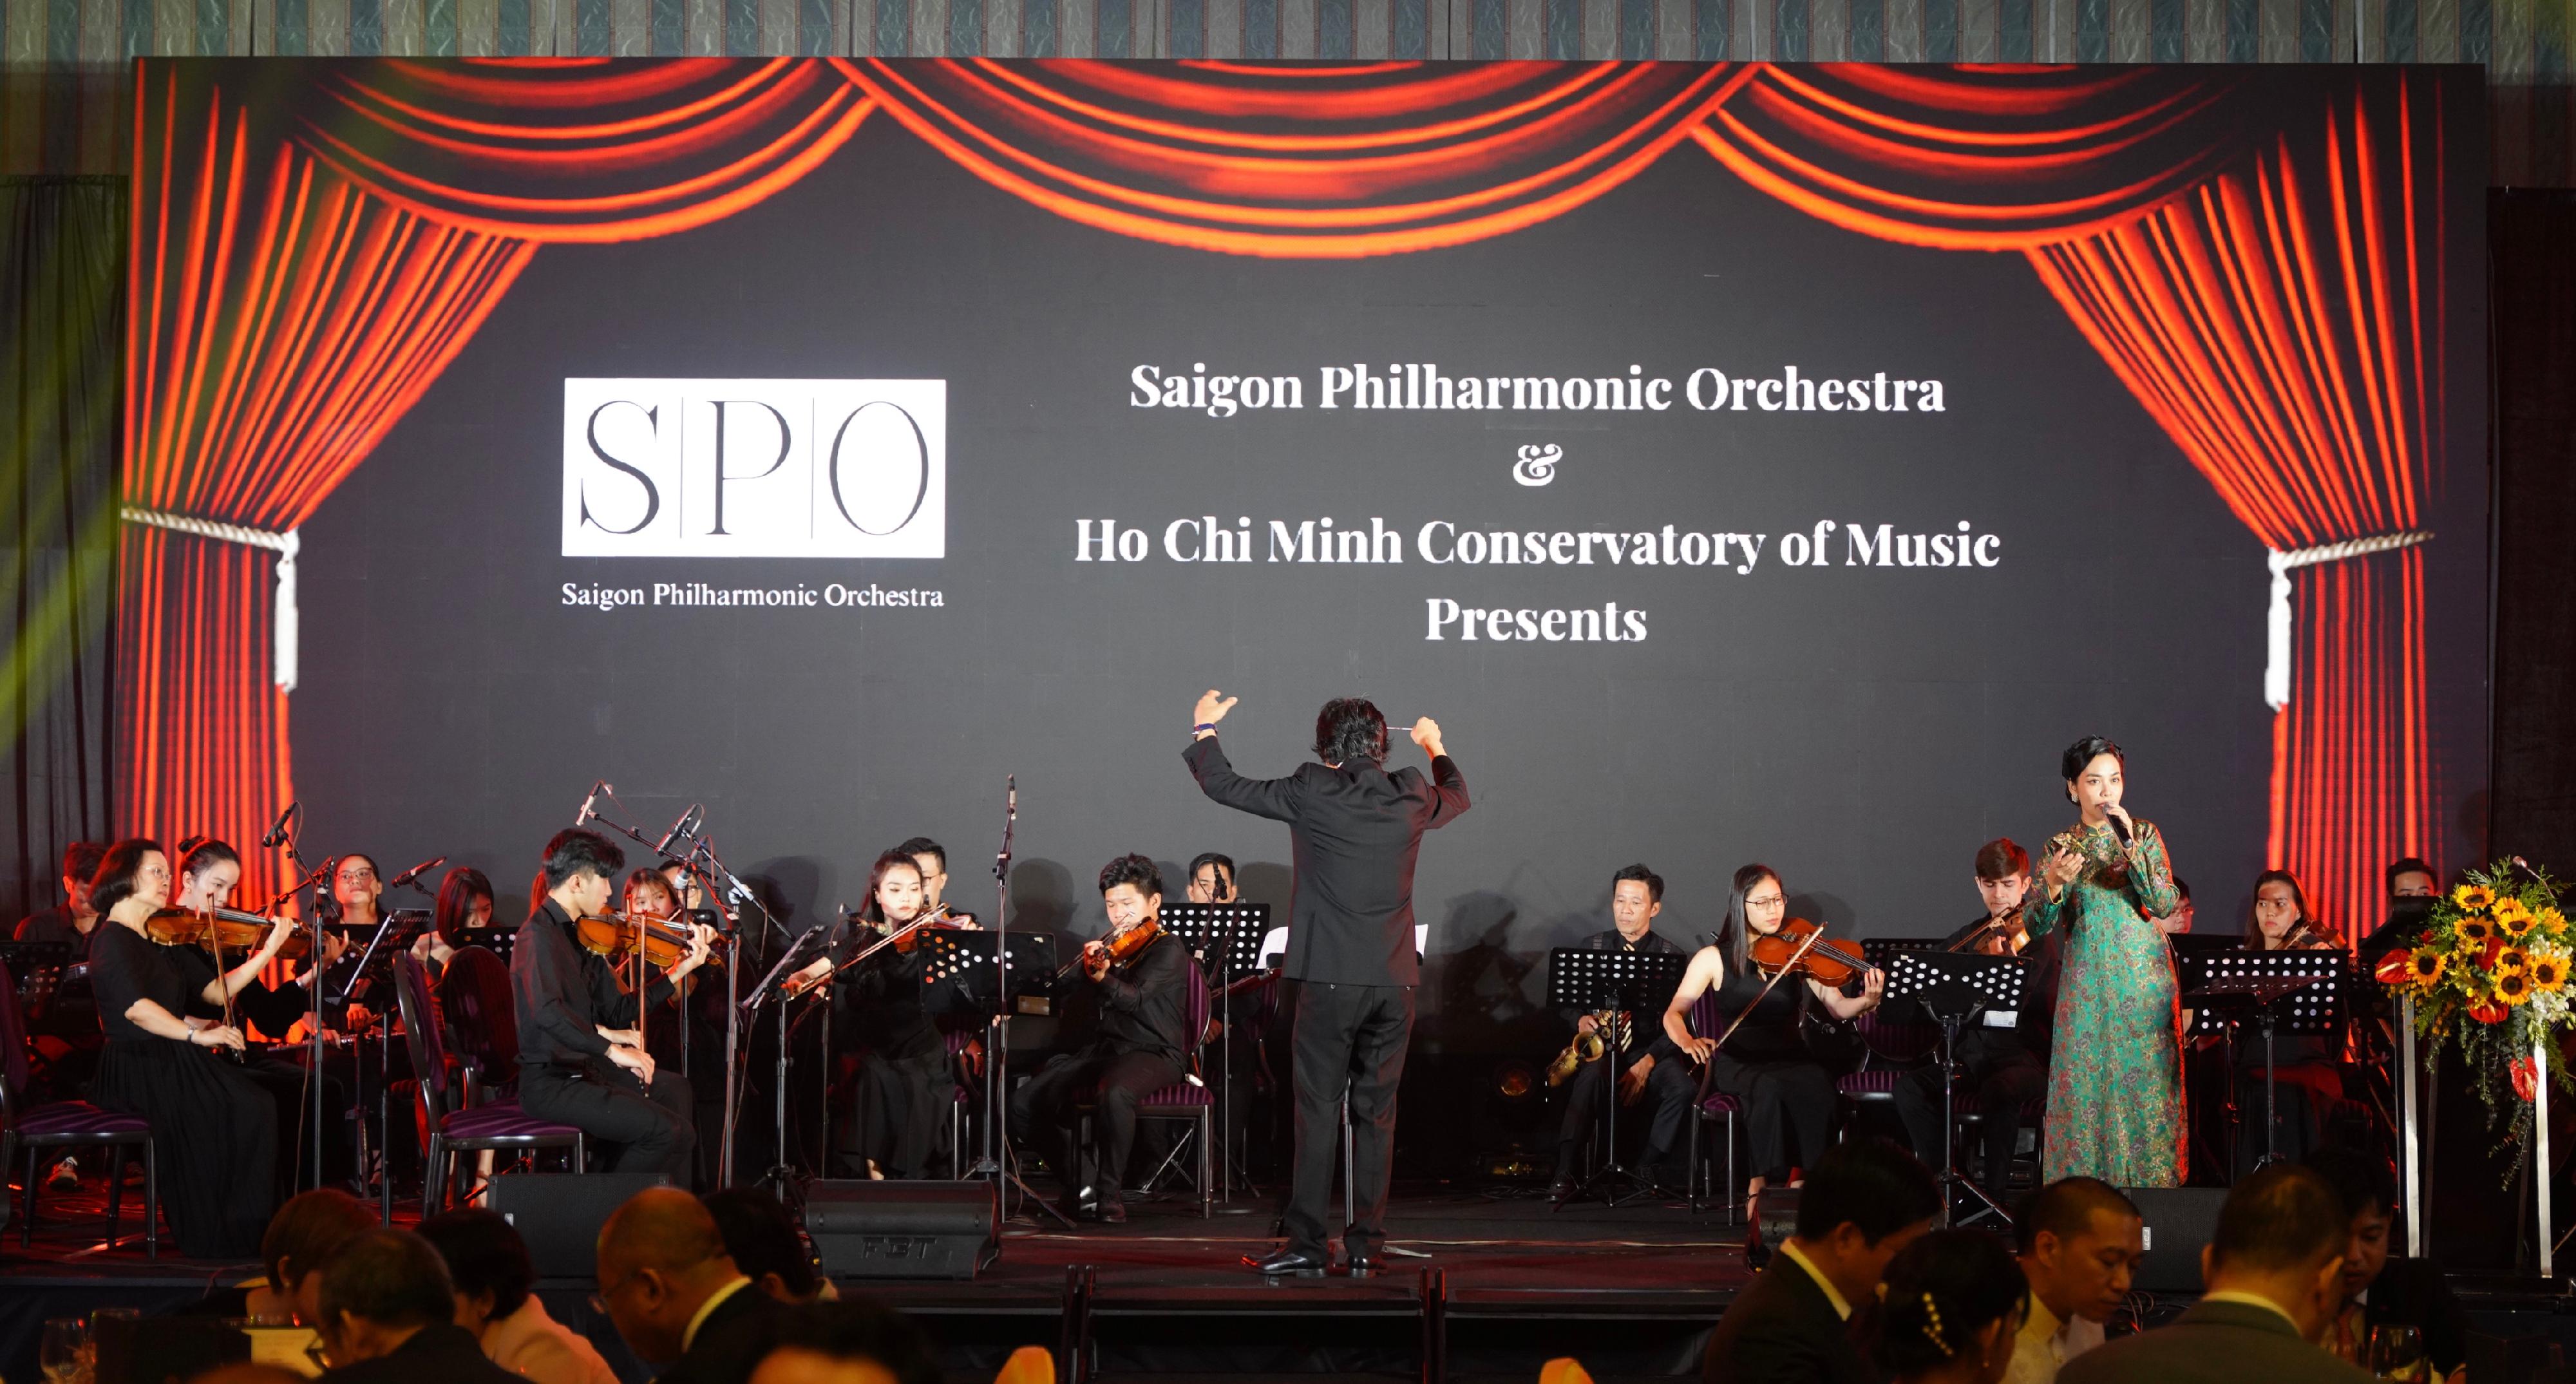 The Hong Kong Economic and Trade Office in Singapore hosted a gala dinner in Ho Chi Minh City, Vietnam today (August 27) in celebration of the 25th anniversary of the establishment of the Hong Kong Special Administrative Region. Photo shows the Saigon Philharmonic Orchestra and Vietnamese opera singer Ngoc Mai (right) performing at the gala dinner.